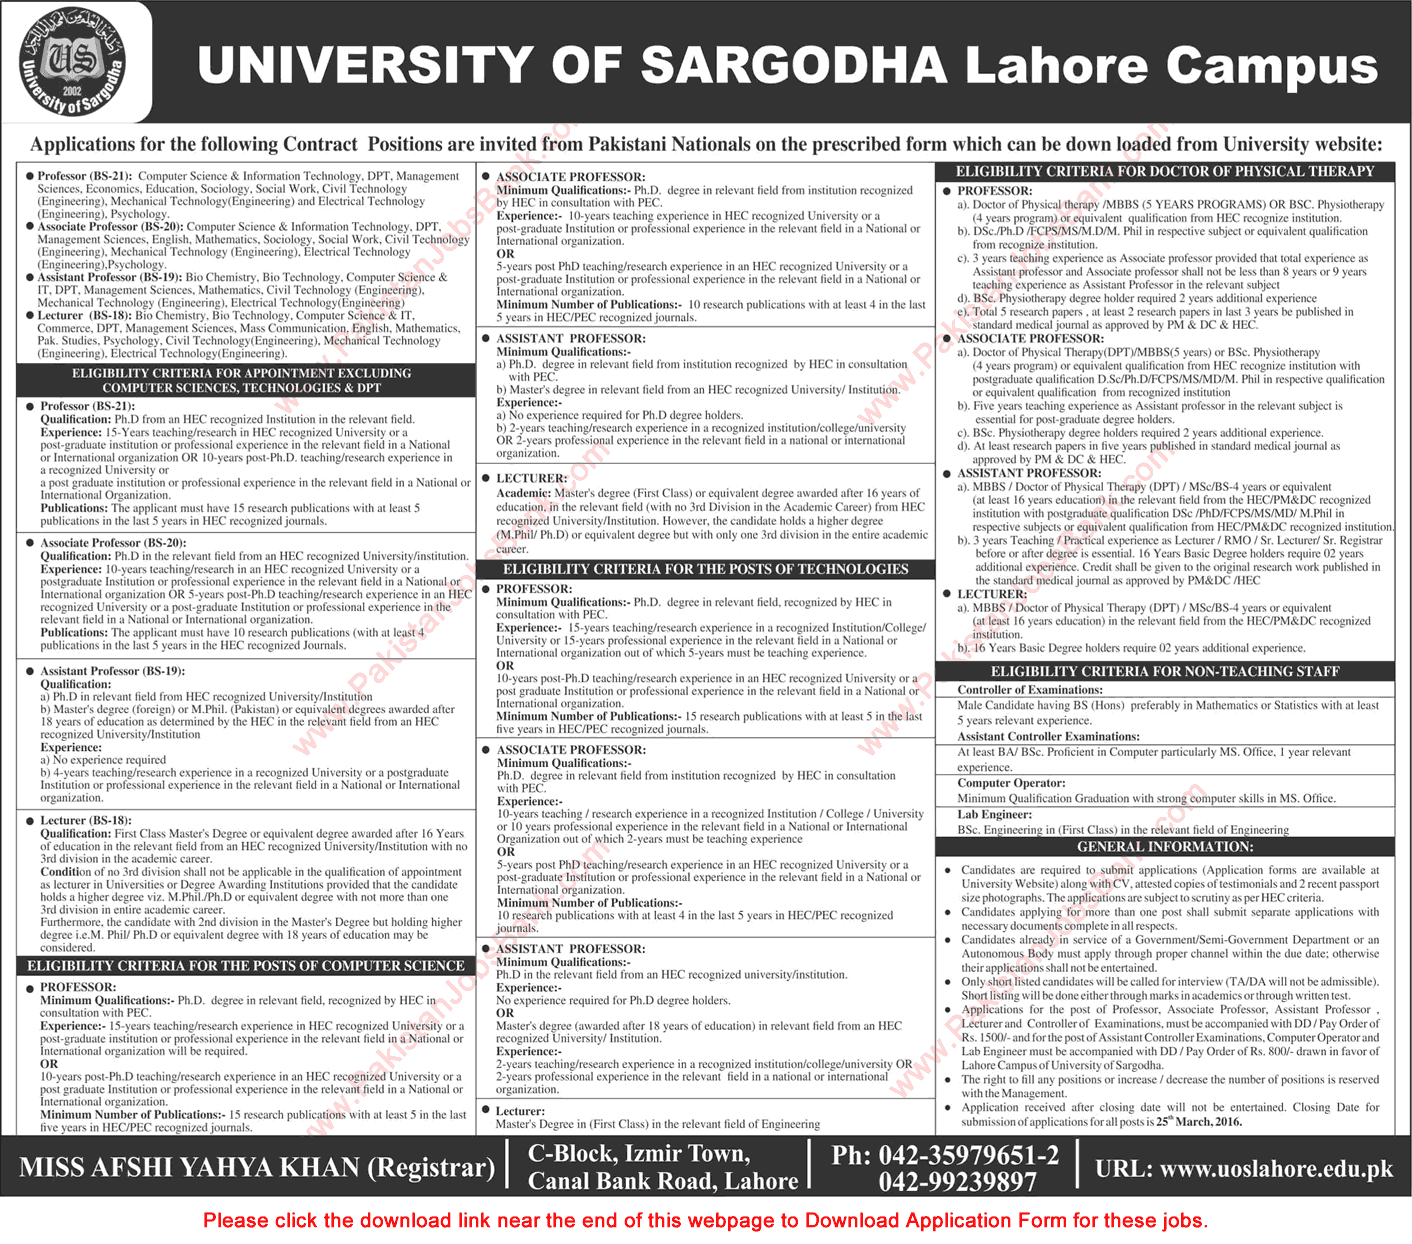 University of Sargodha Lahore Campus Jobs 2016 March Application Form Teaching Faculty Latest